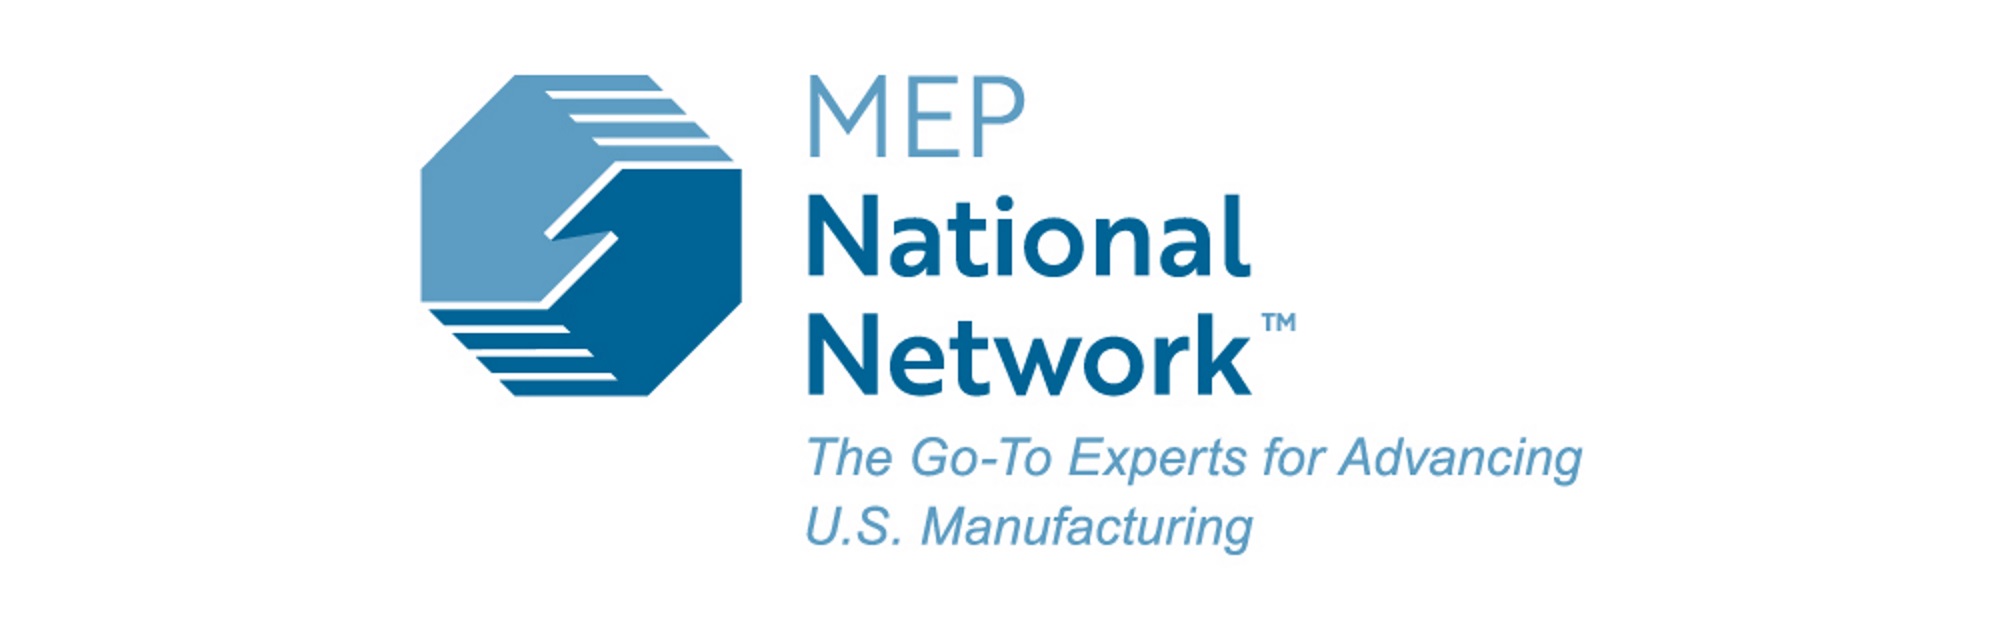 NIST MEP Logo: MEP National Network - The Go-To Experts for Advancing U.S. Manufacturing.